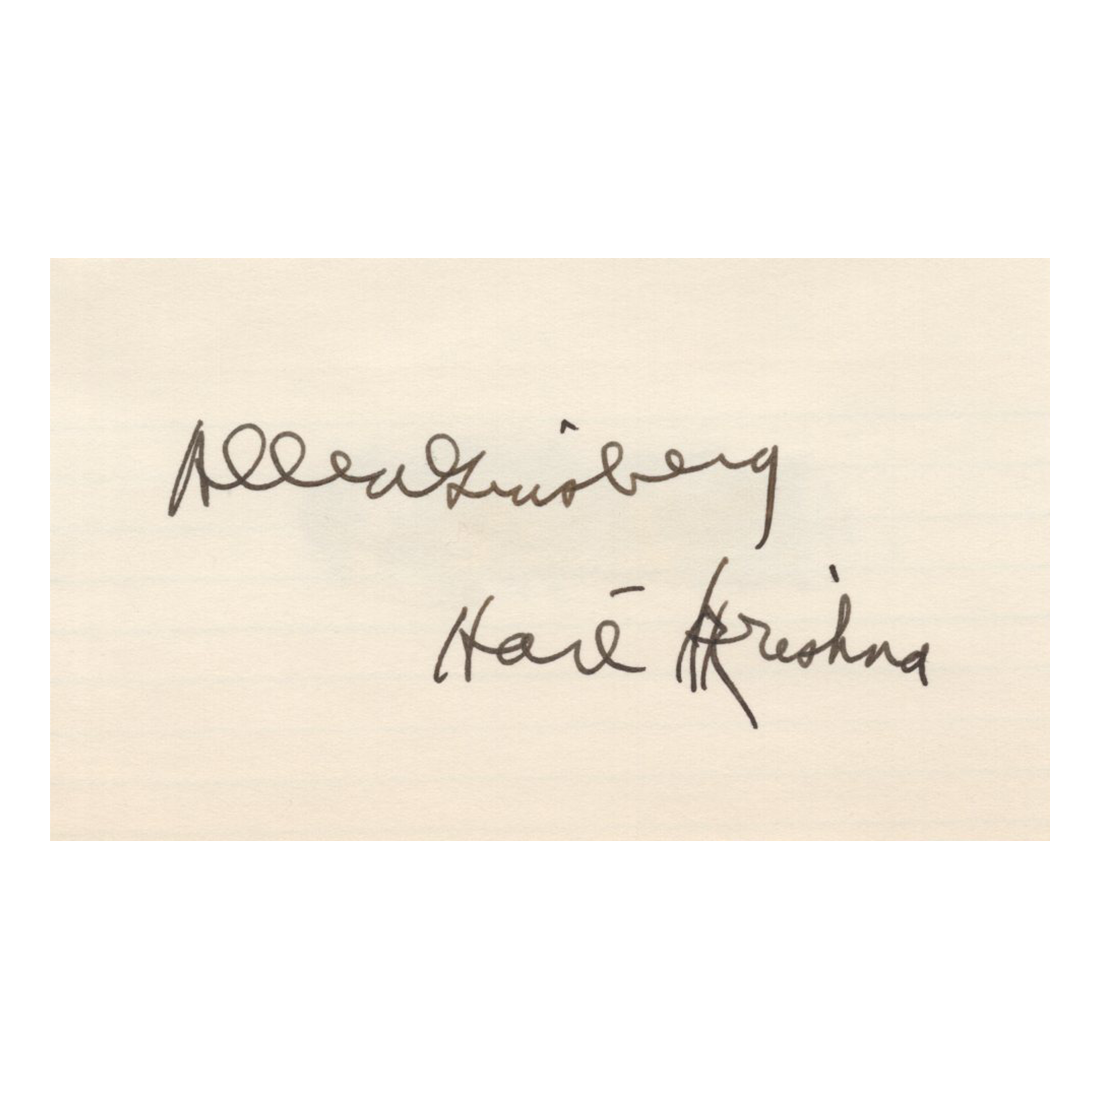 Allen Ginsberg - Signed 3 x 5 inch Card with &quot;Hail Krishna&quot; Inscription